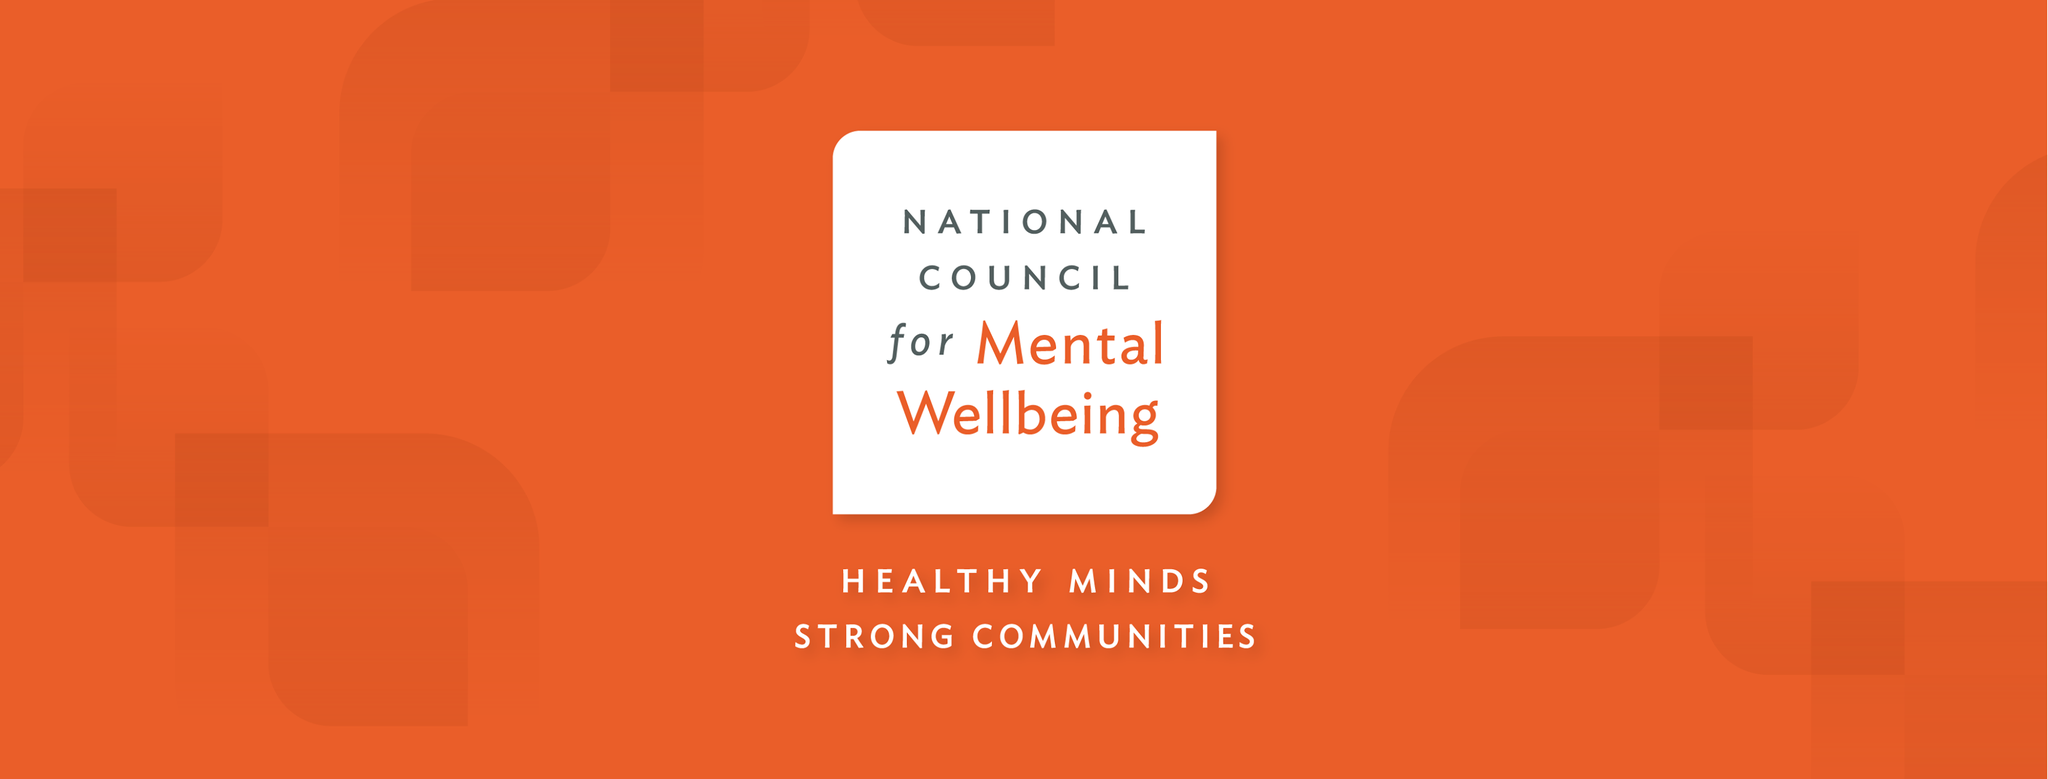 Orange and black logo for the Council for Mental Wellbeing